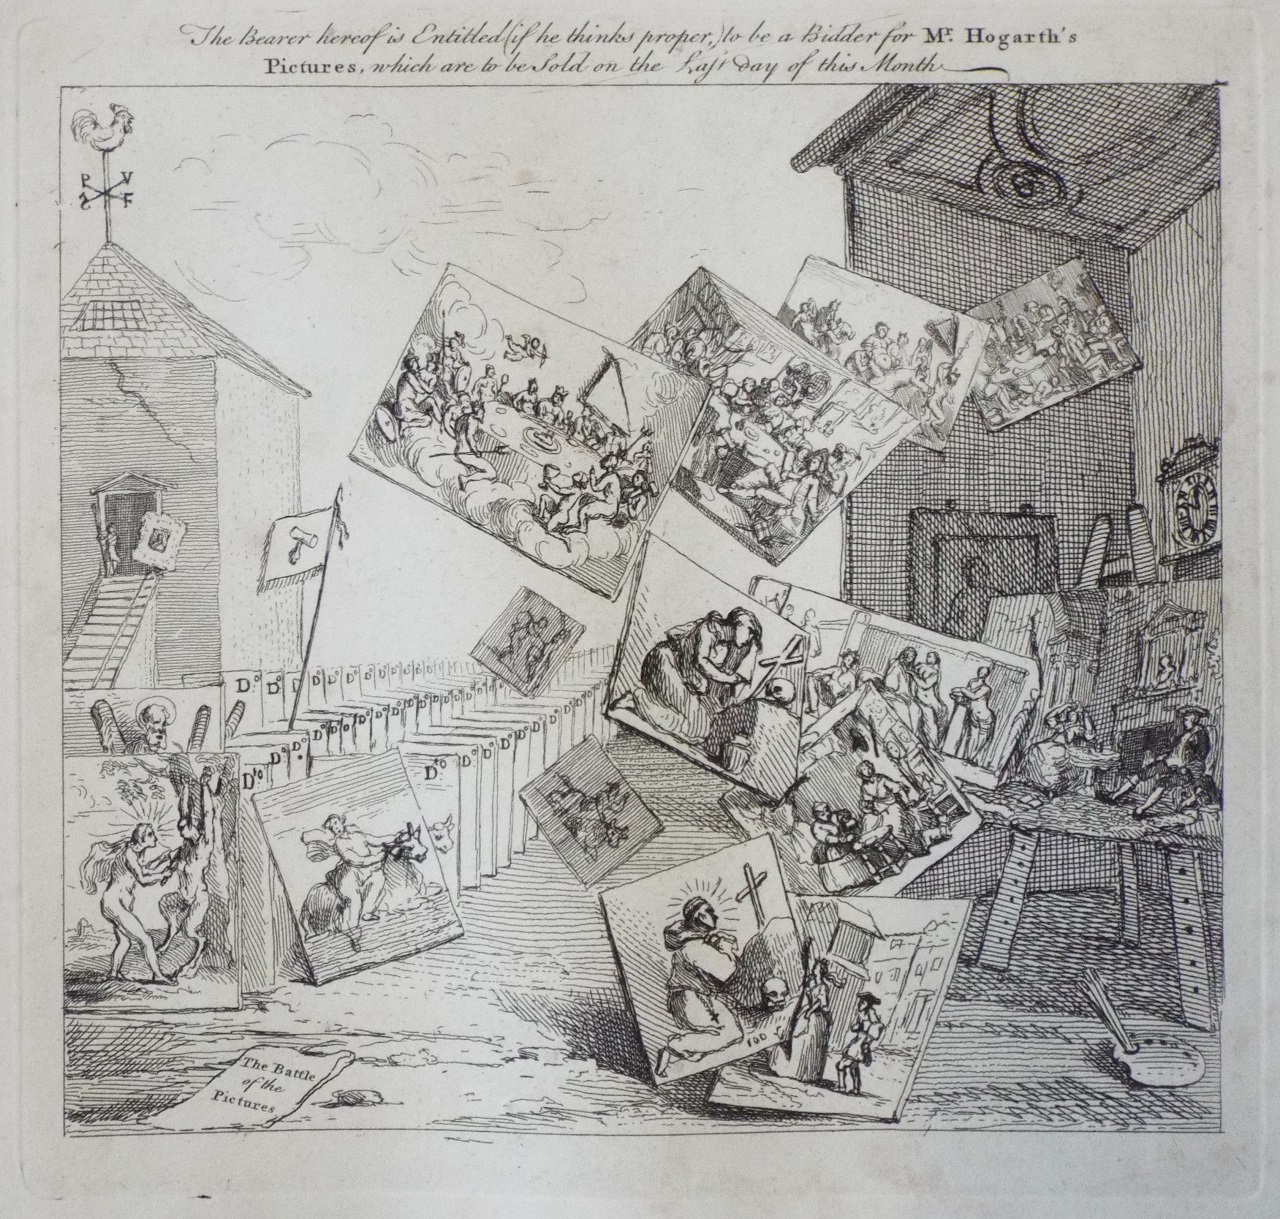 Print - Battle of the Pictures - Hogarth